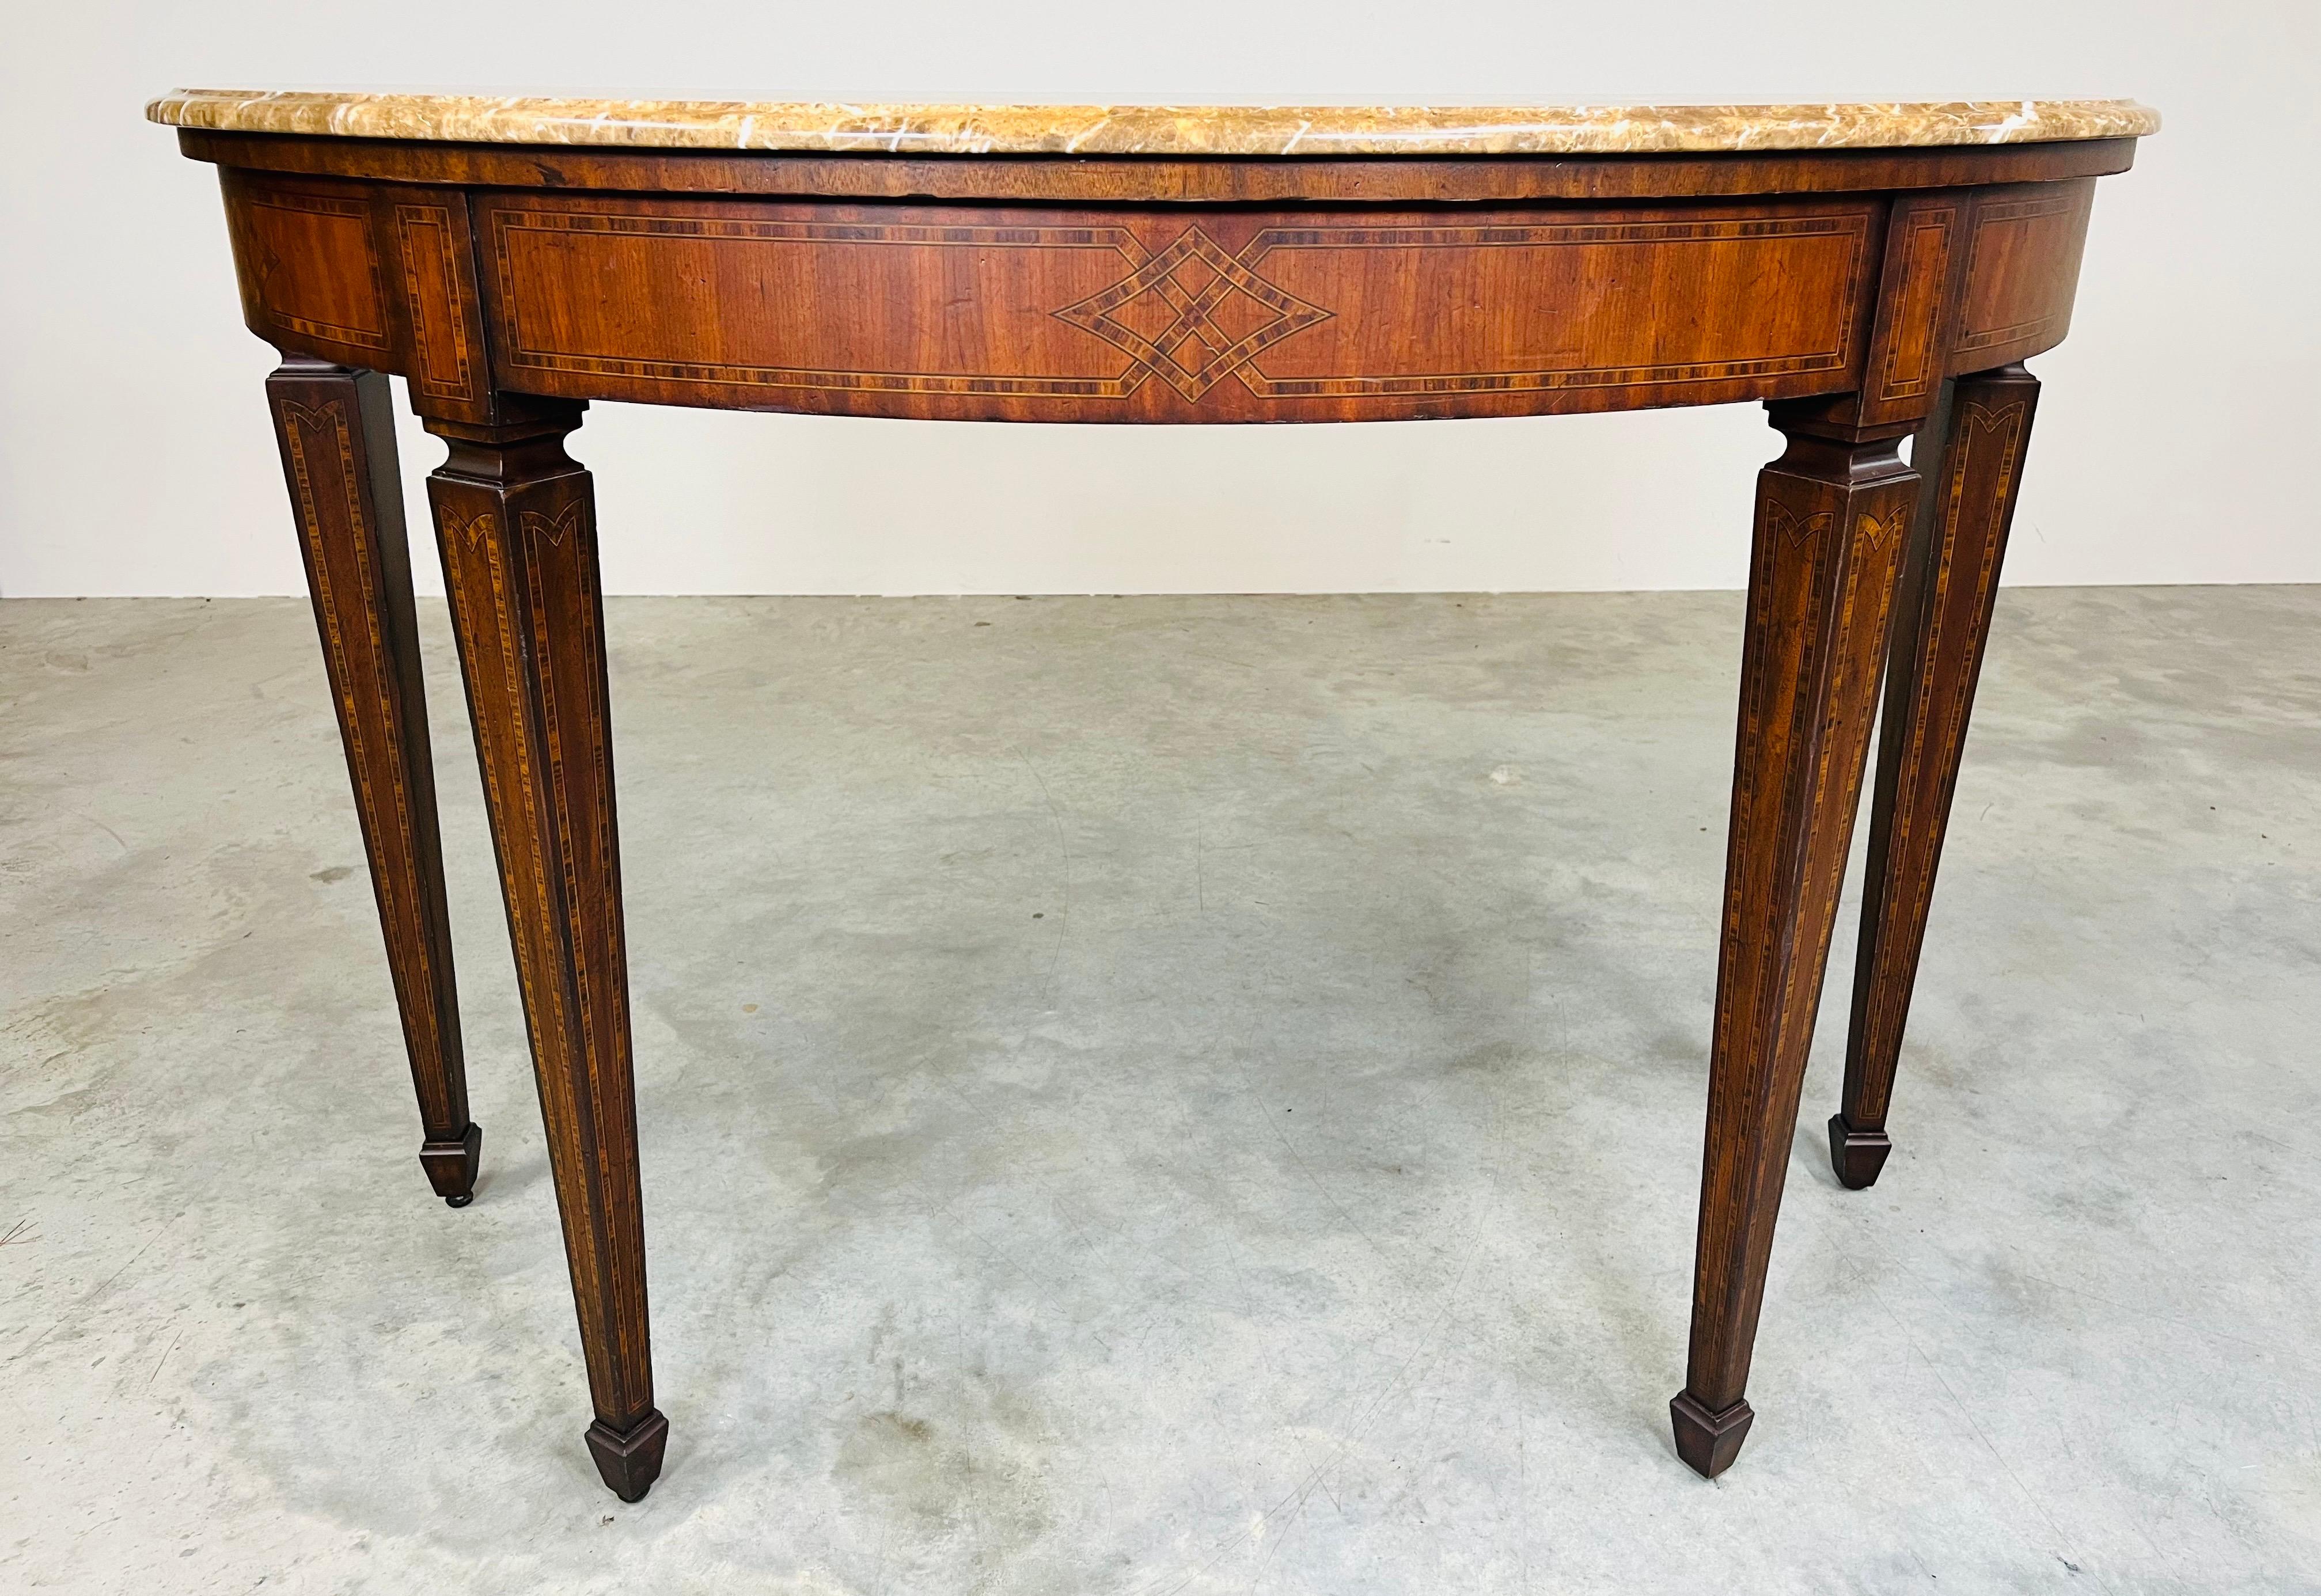 A stunning Demi-lune table by Maitland Smith in the Adam style having beautiful parquetry inlay throughout with tapered legs and stone granite top. 
In excellent condition. Wood has been cleaned and treated for longevity. 
35x52x21.5” HWD 